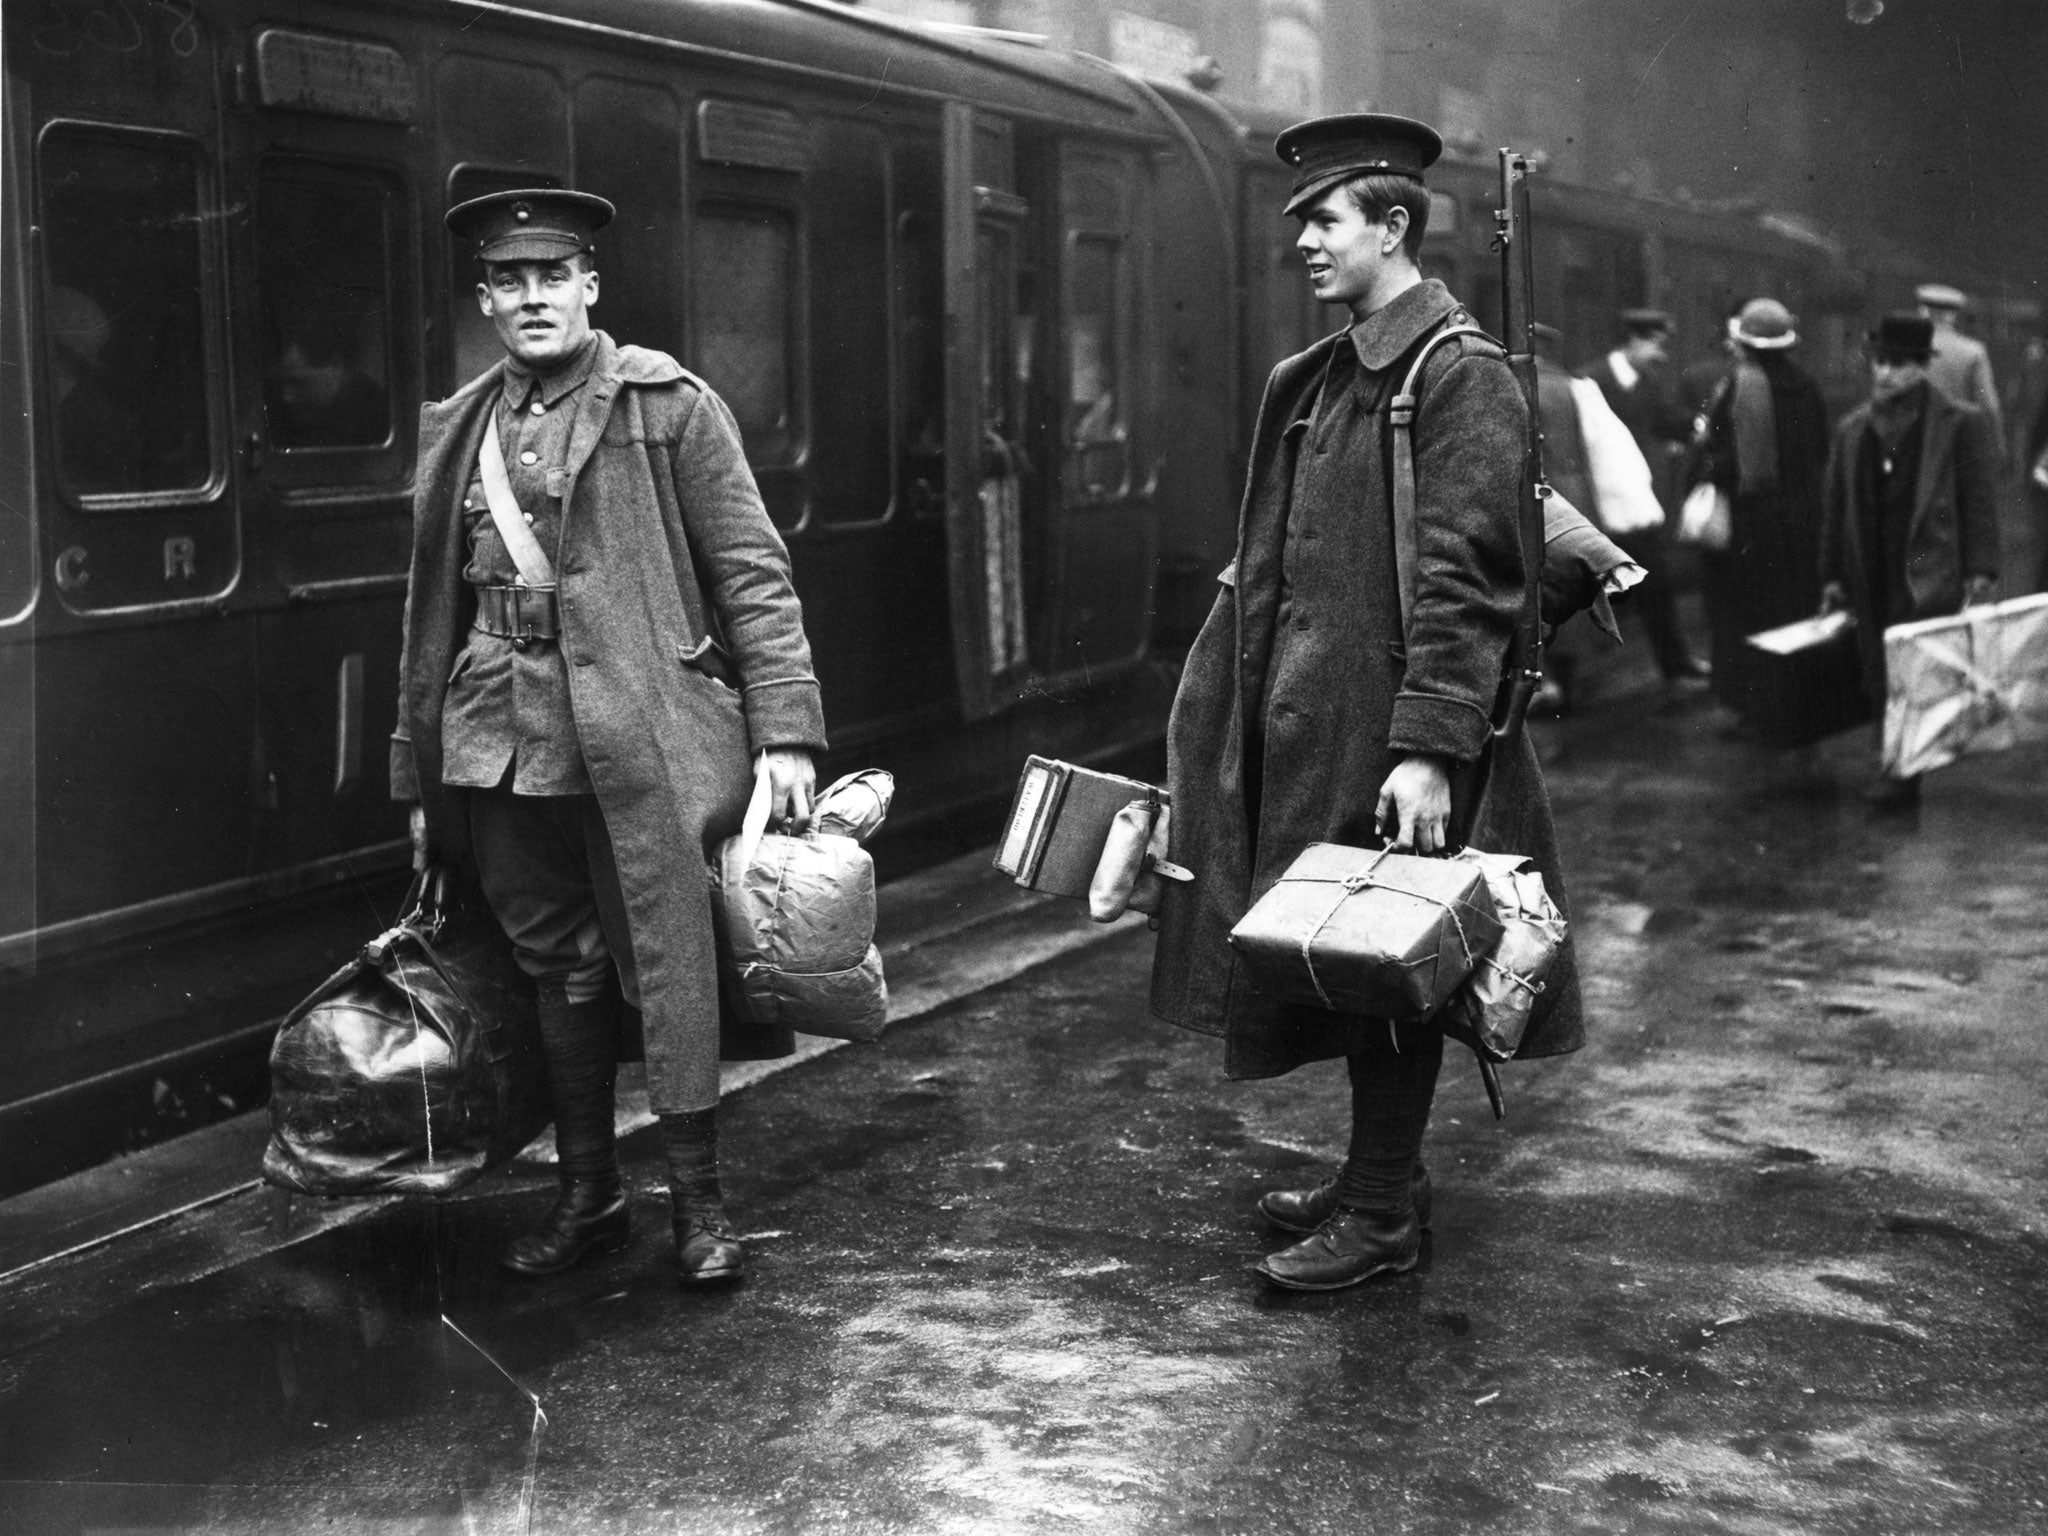 Two soldiers on the concourse at Victoria station, London, about to leave for the front line.